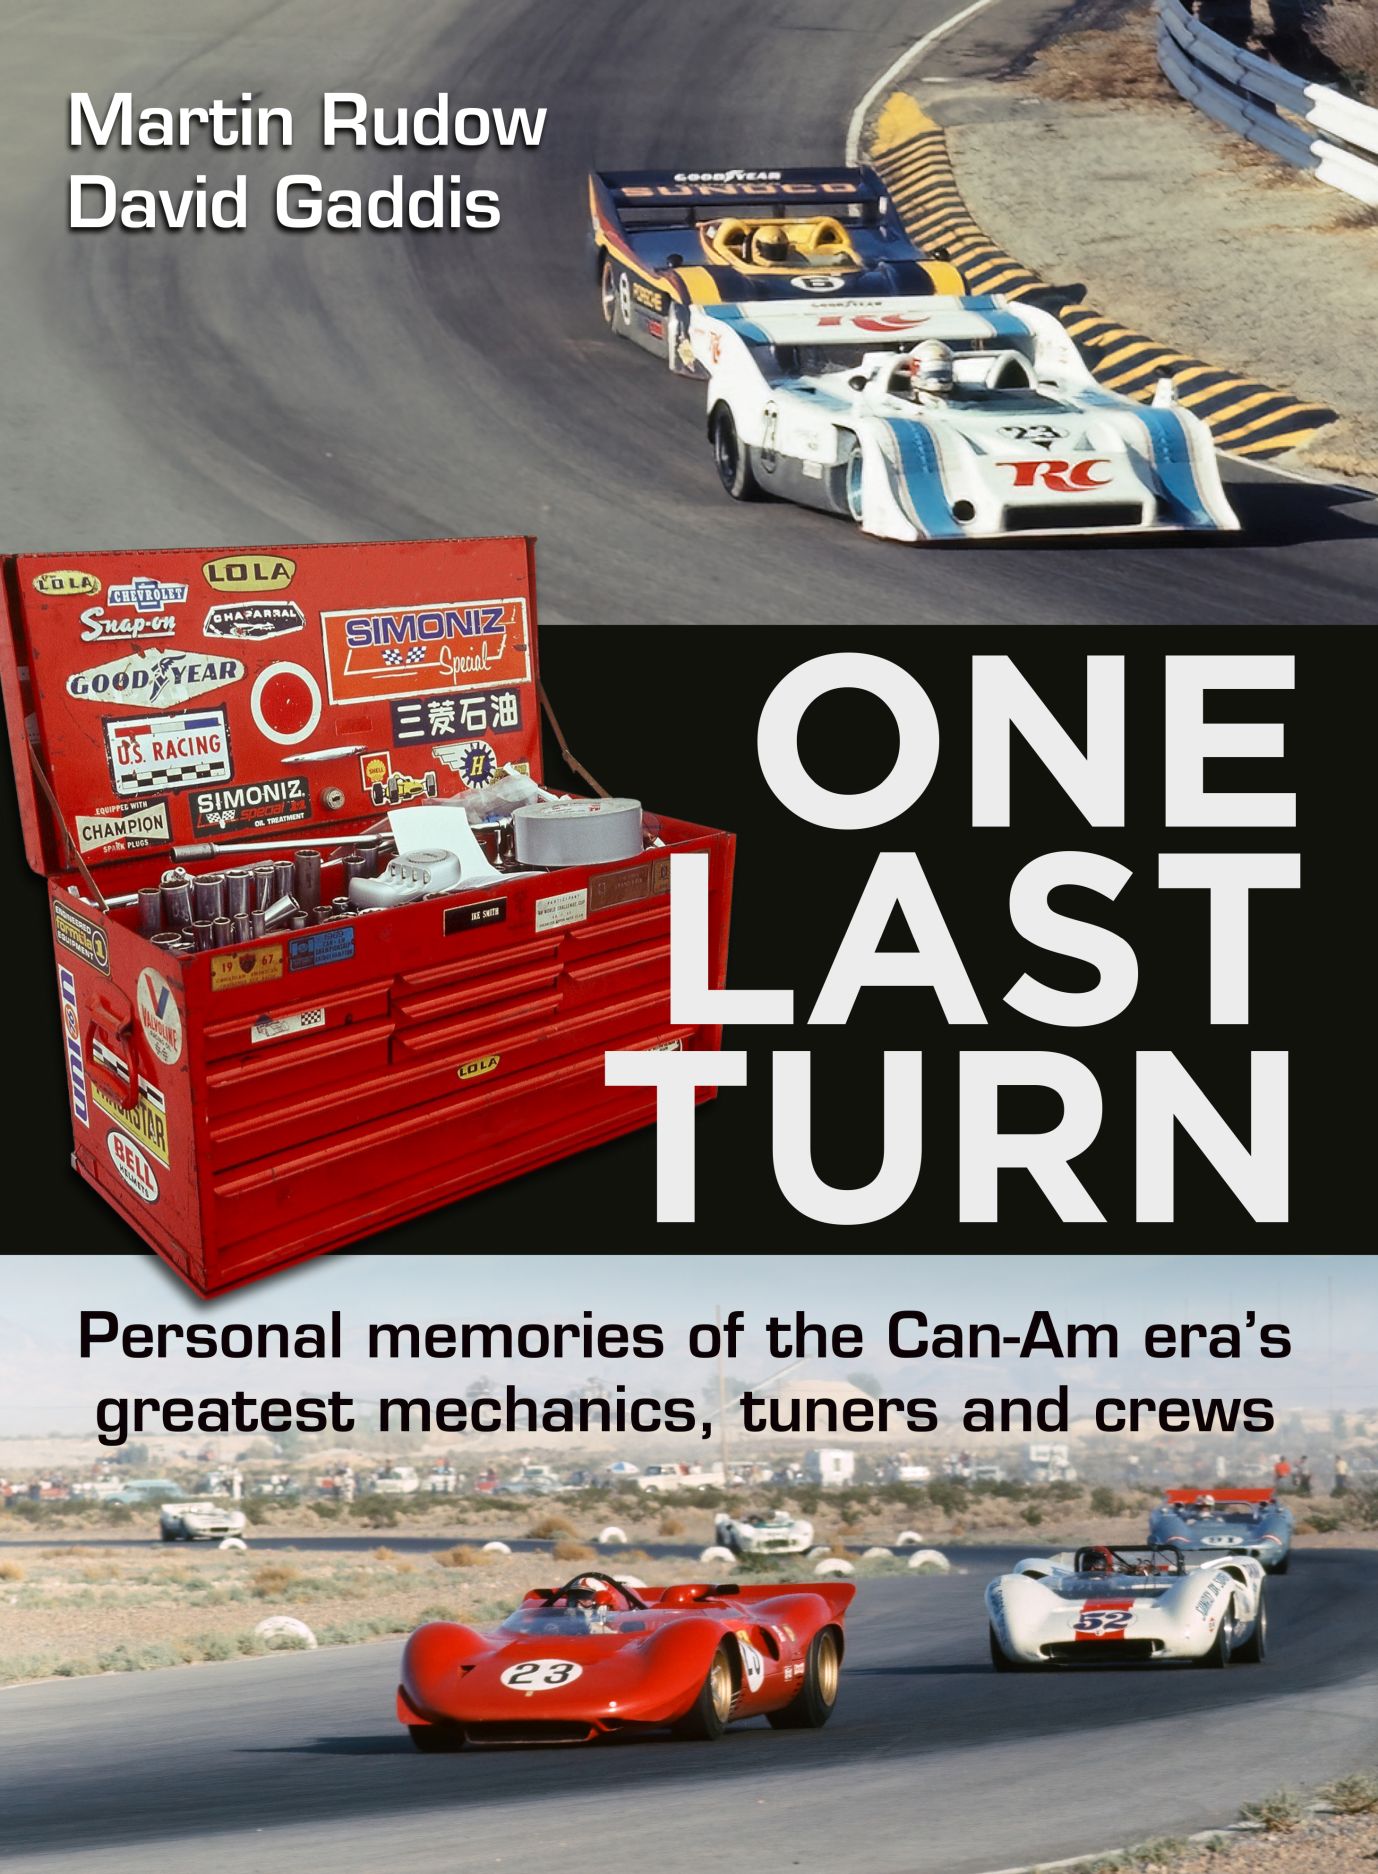 One Last Turn: Personal memories of the Can-Am era's greatest mechanics,  tuners and crews, Rudow, Gaddis